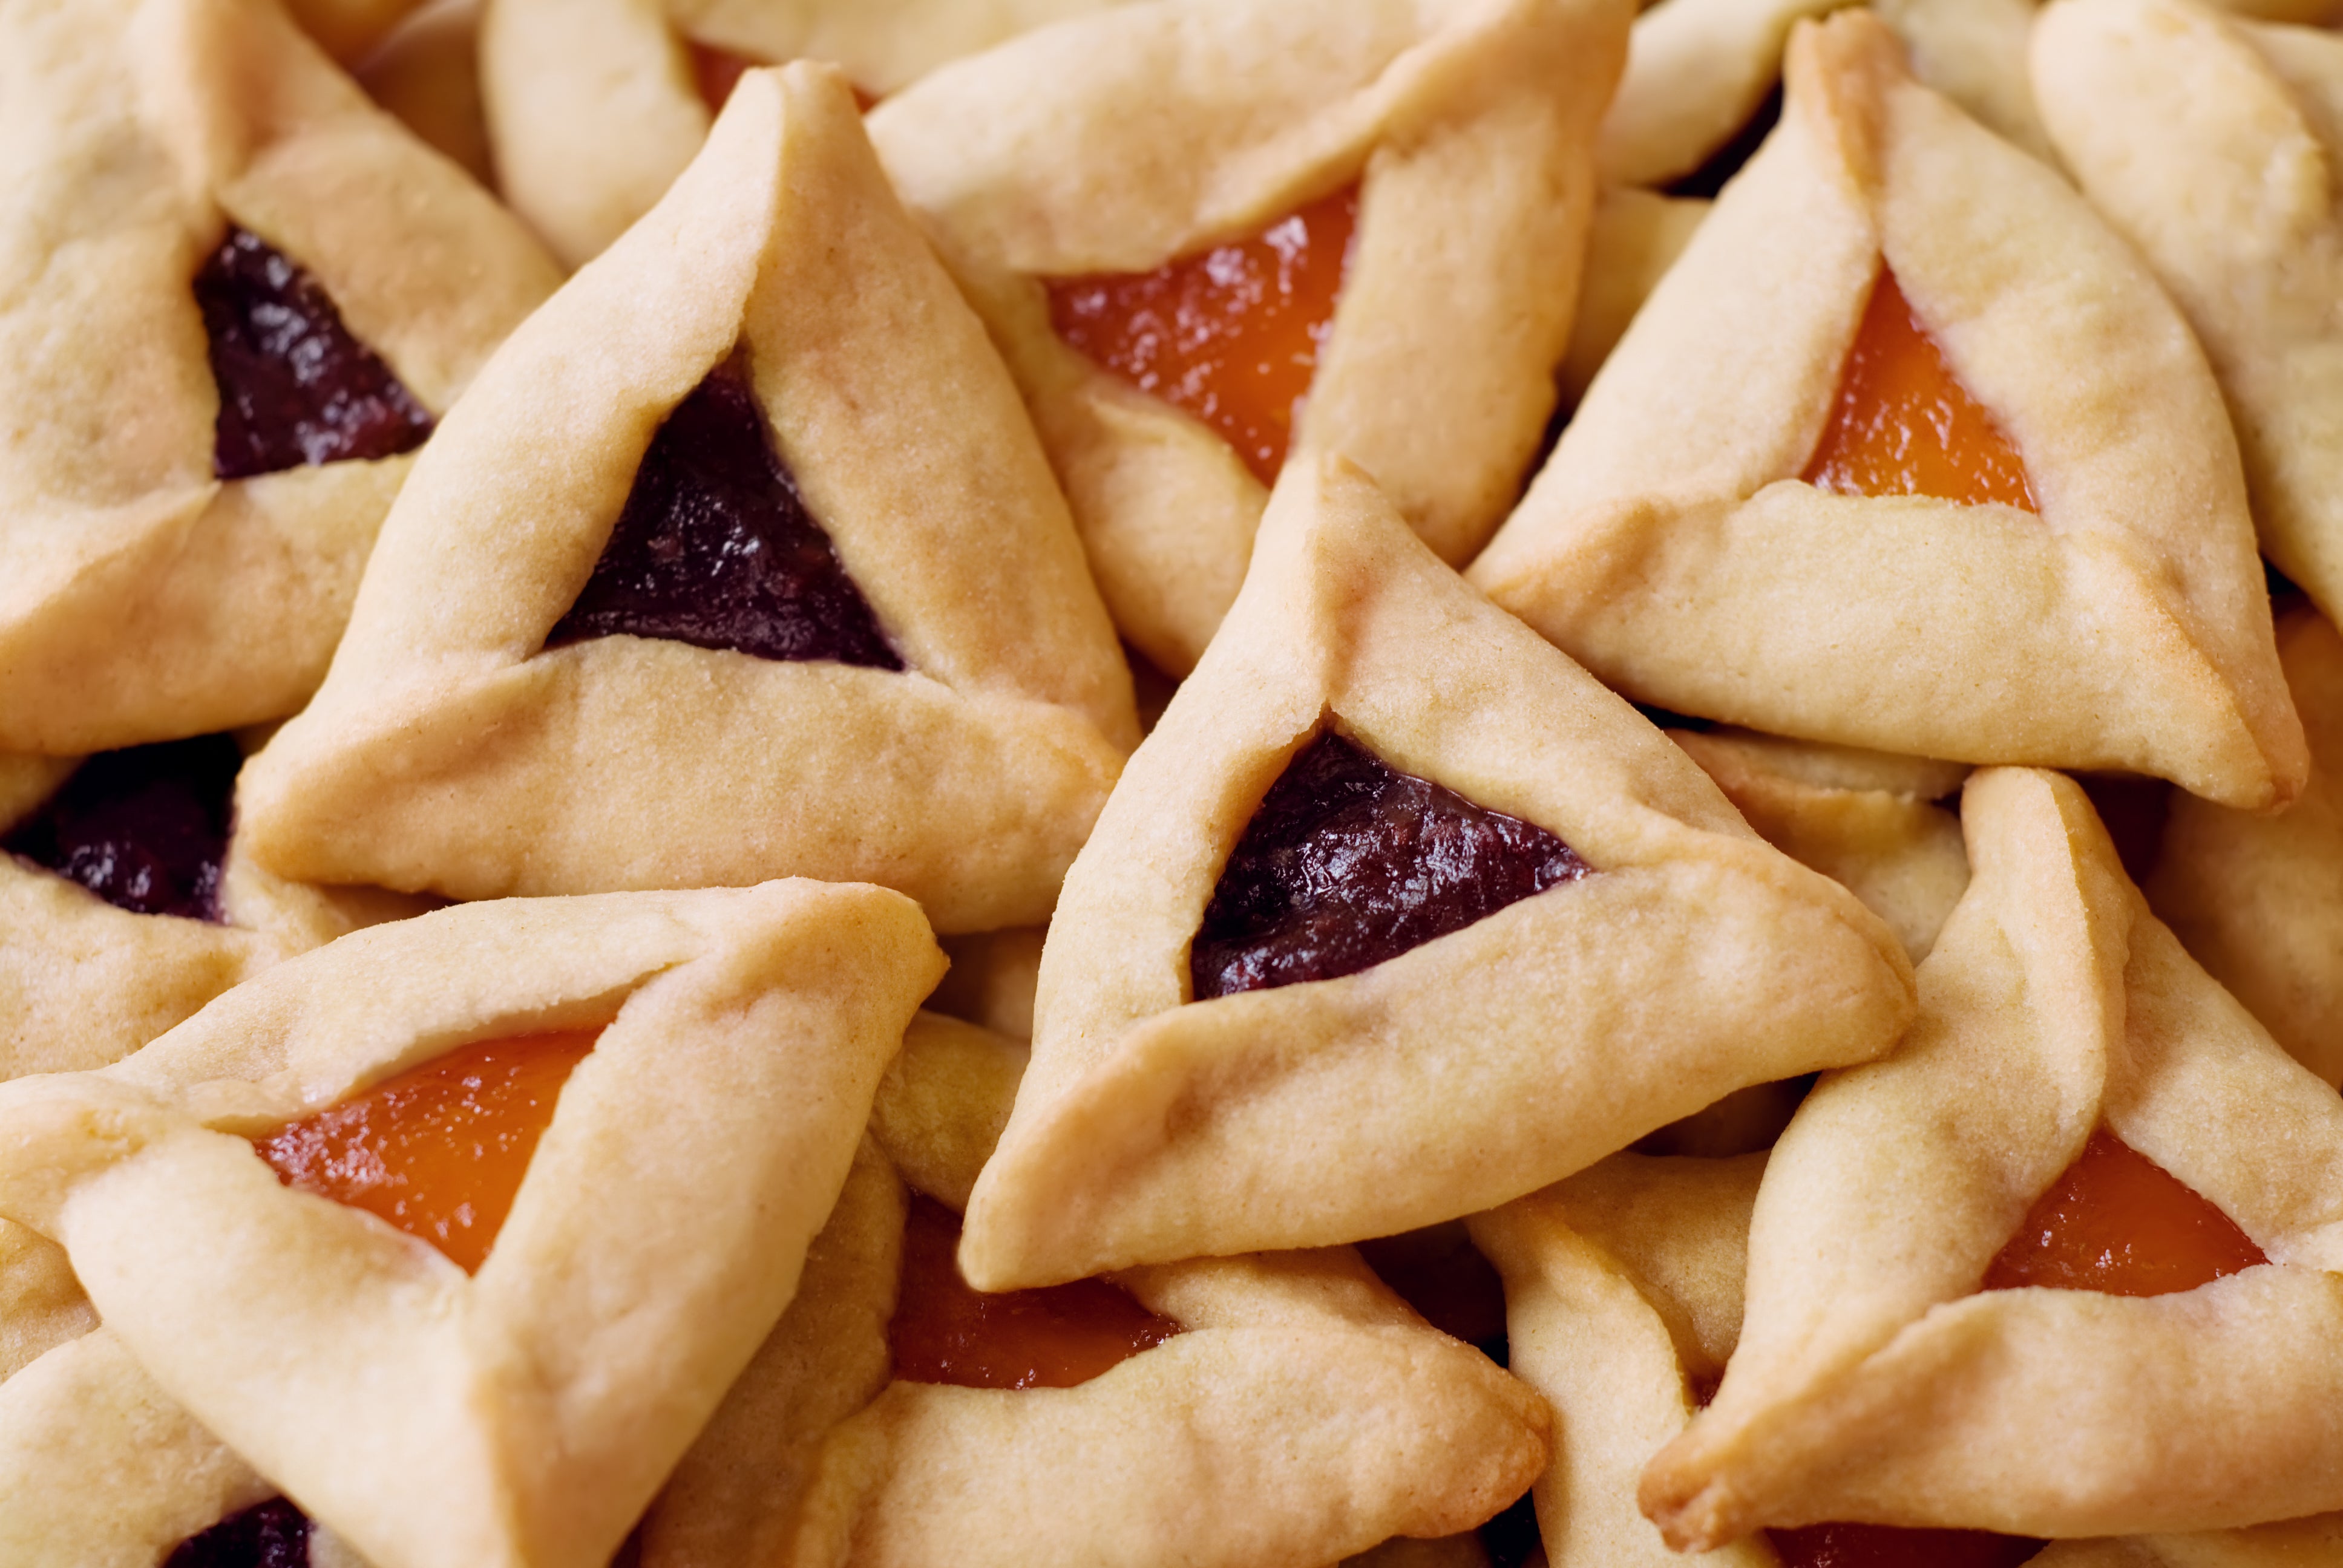 What is Purim and what are hamantaschen?